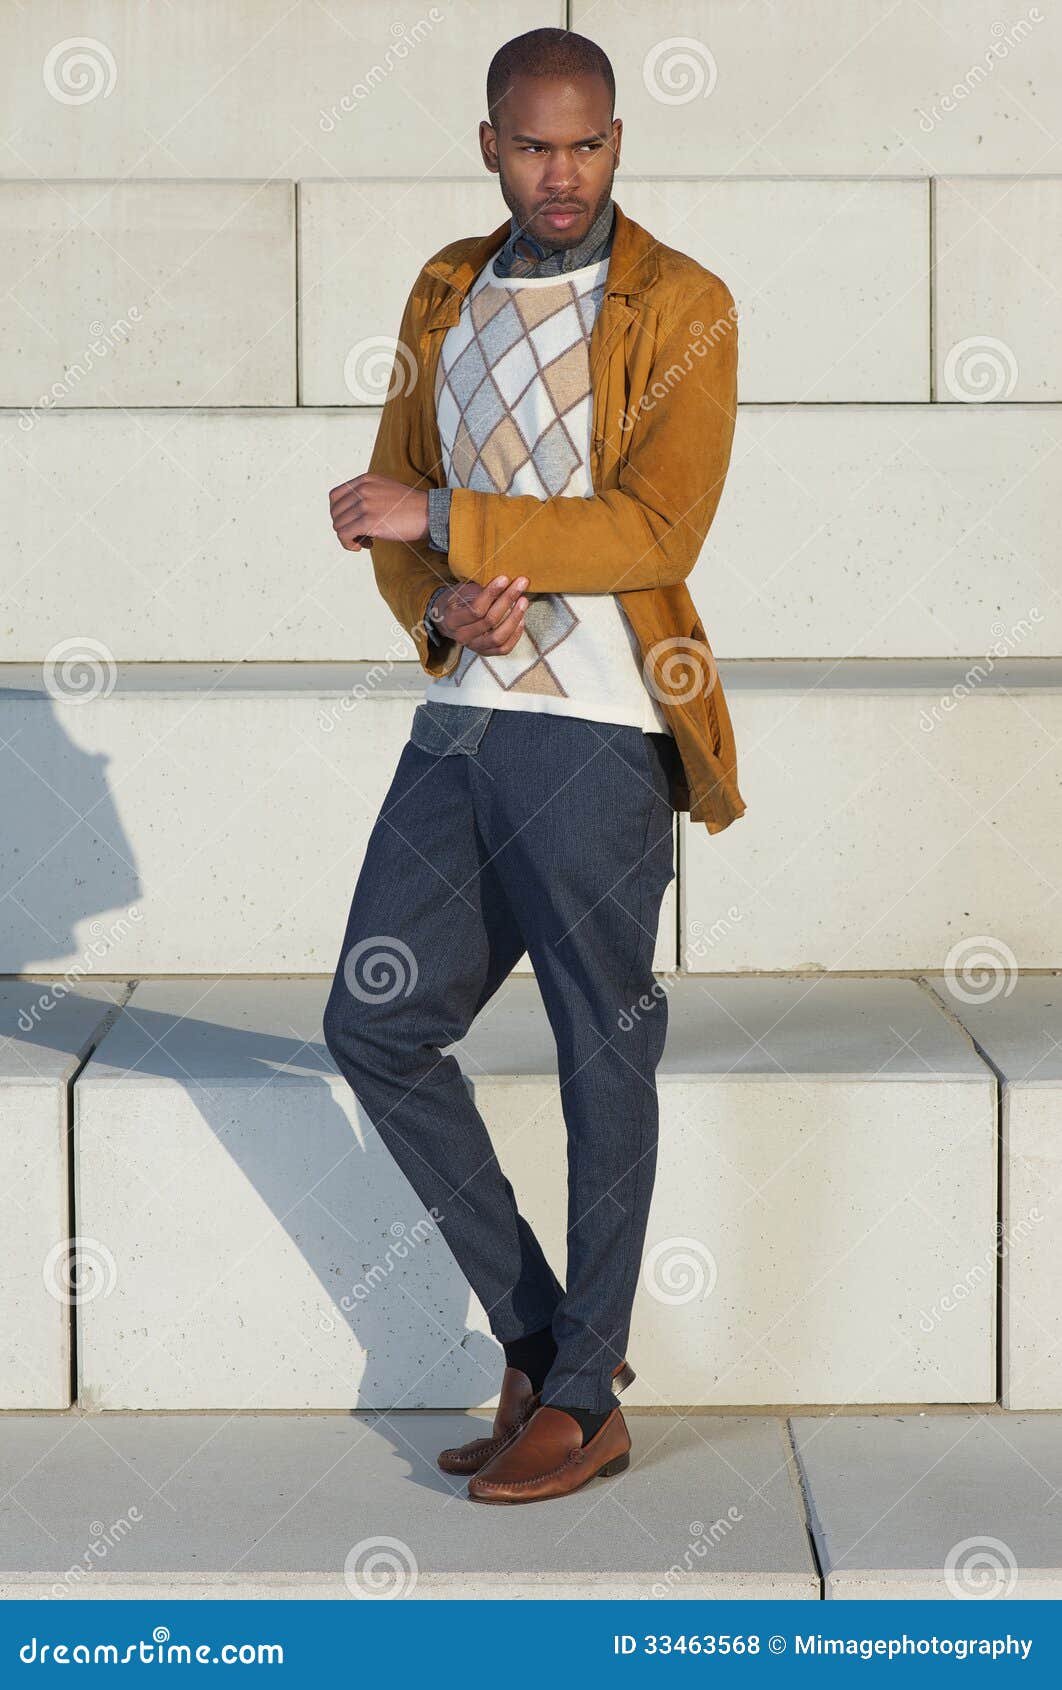 Handsome Male Fashion Model Standing Outdoors Stock Photo - Image of ...